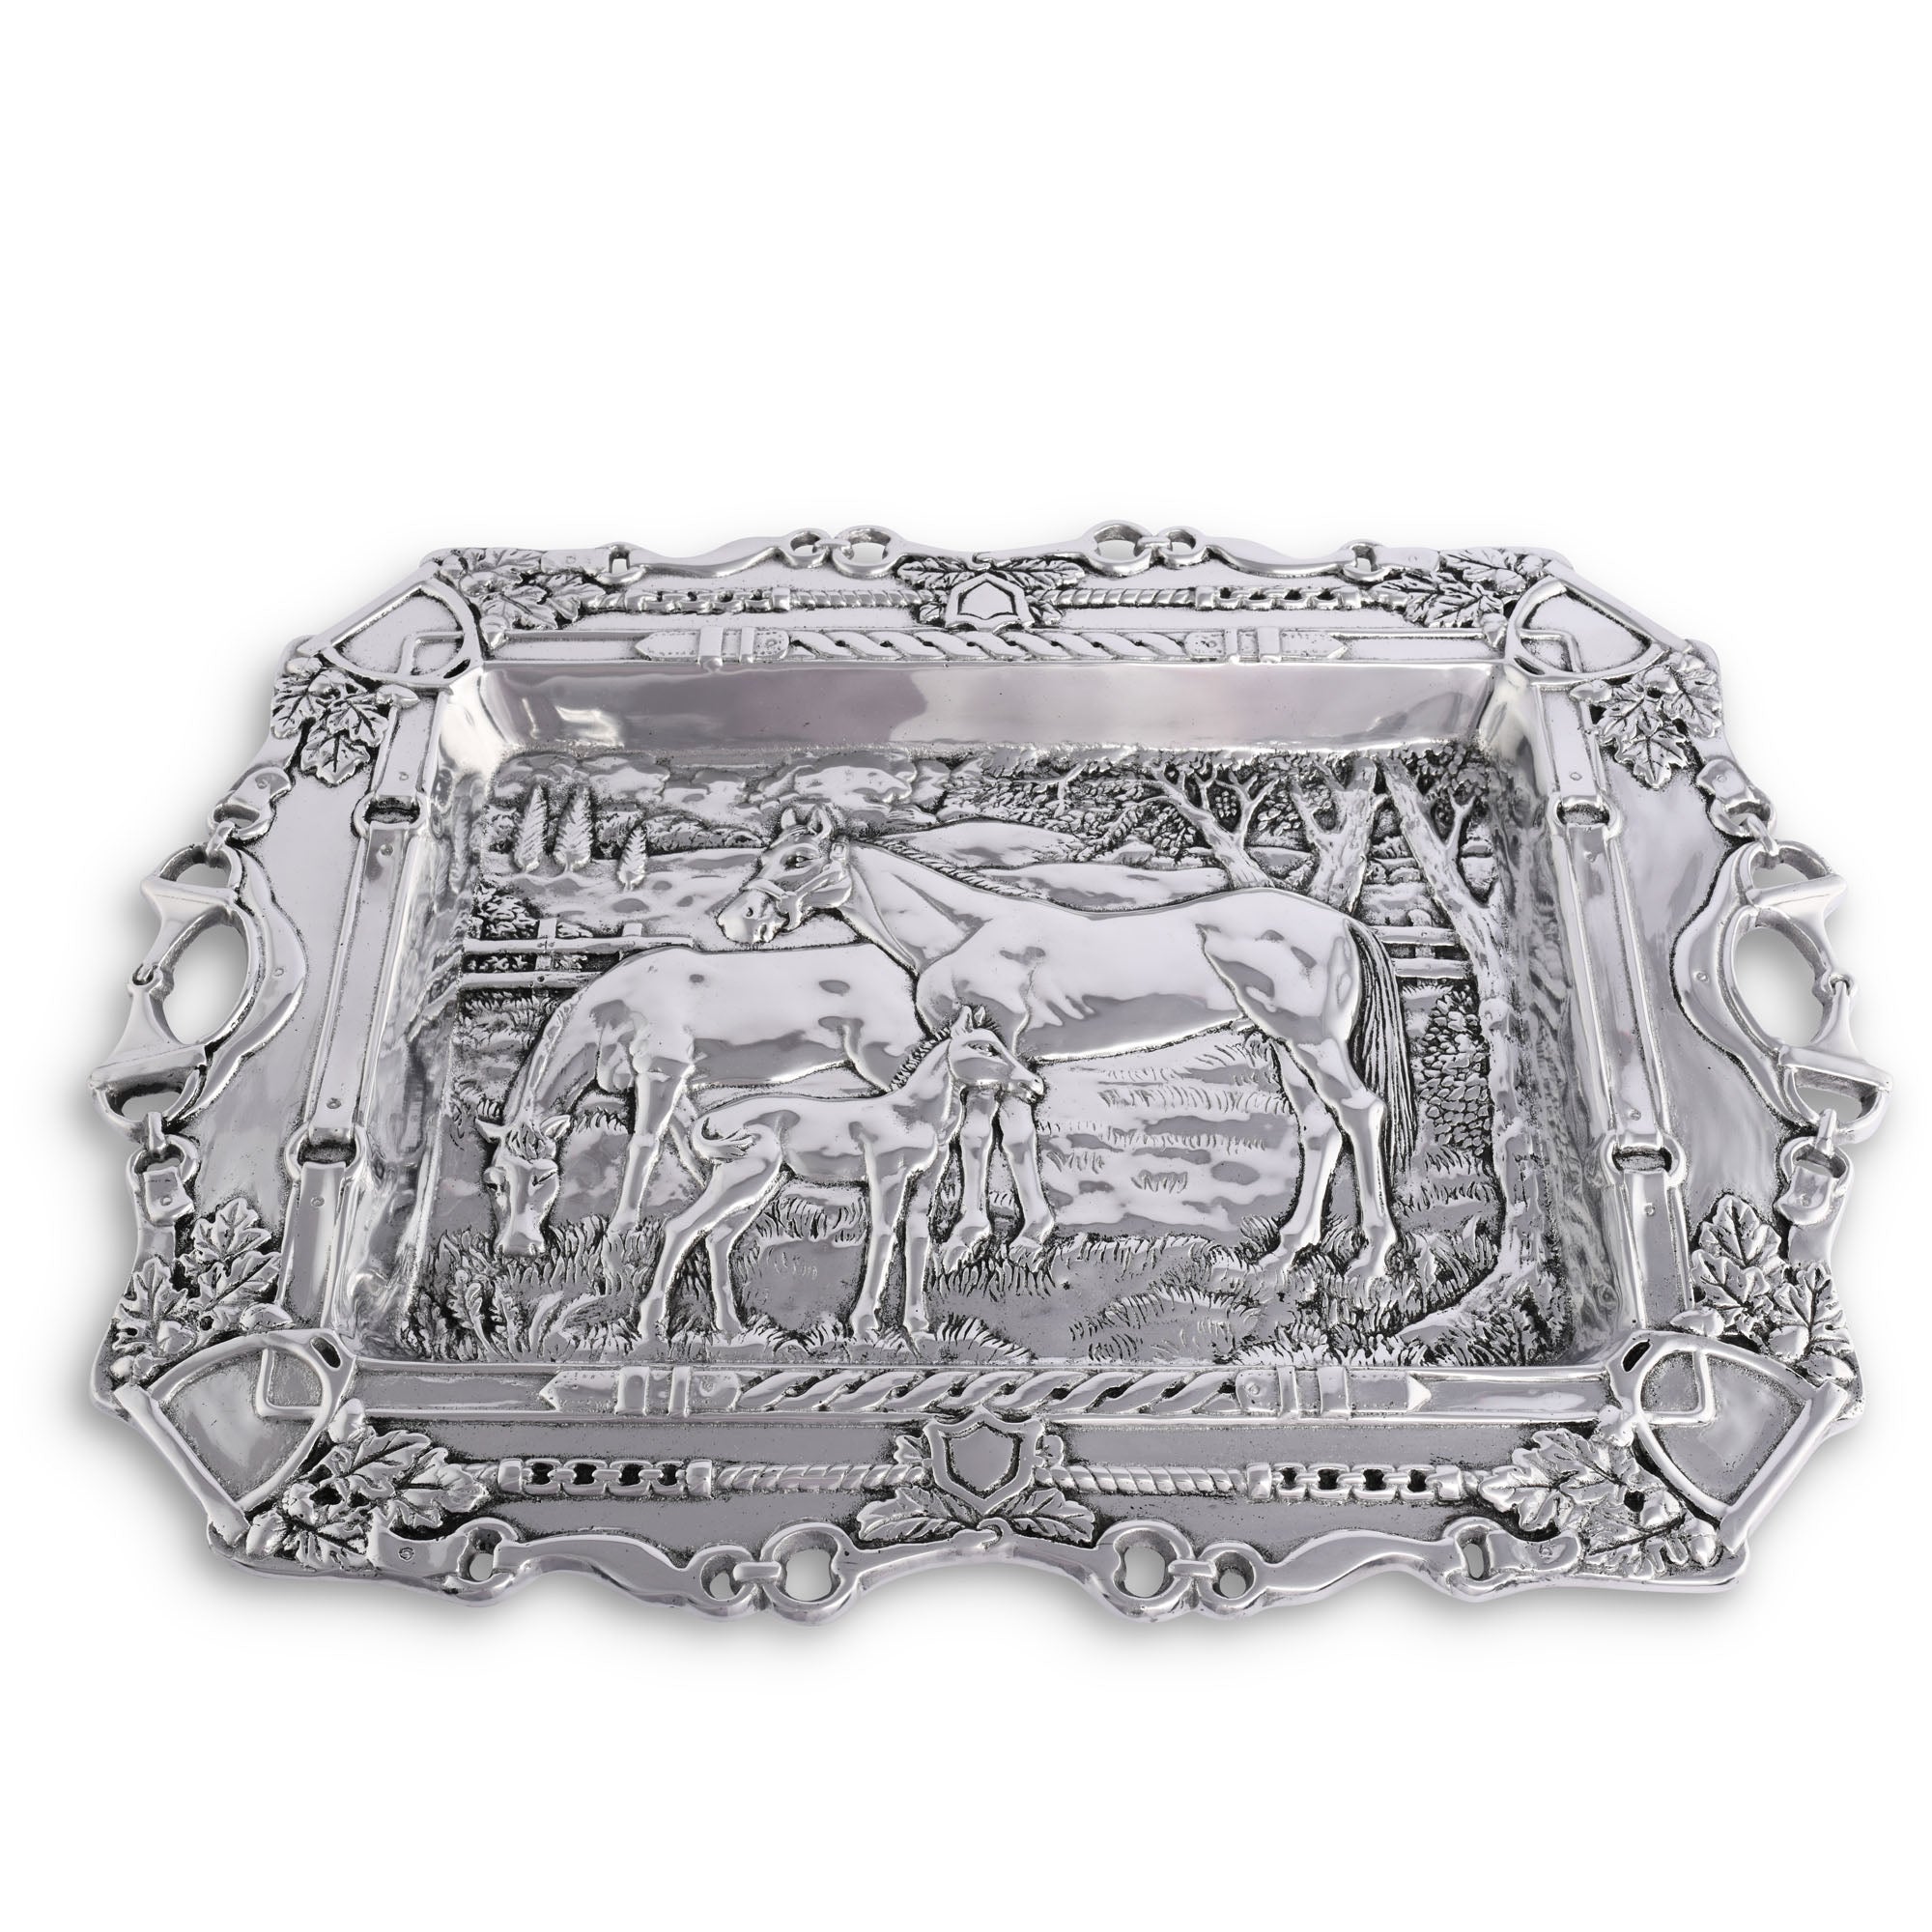 Arthur Court Grazing Horses Parlor Tray Product Image